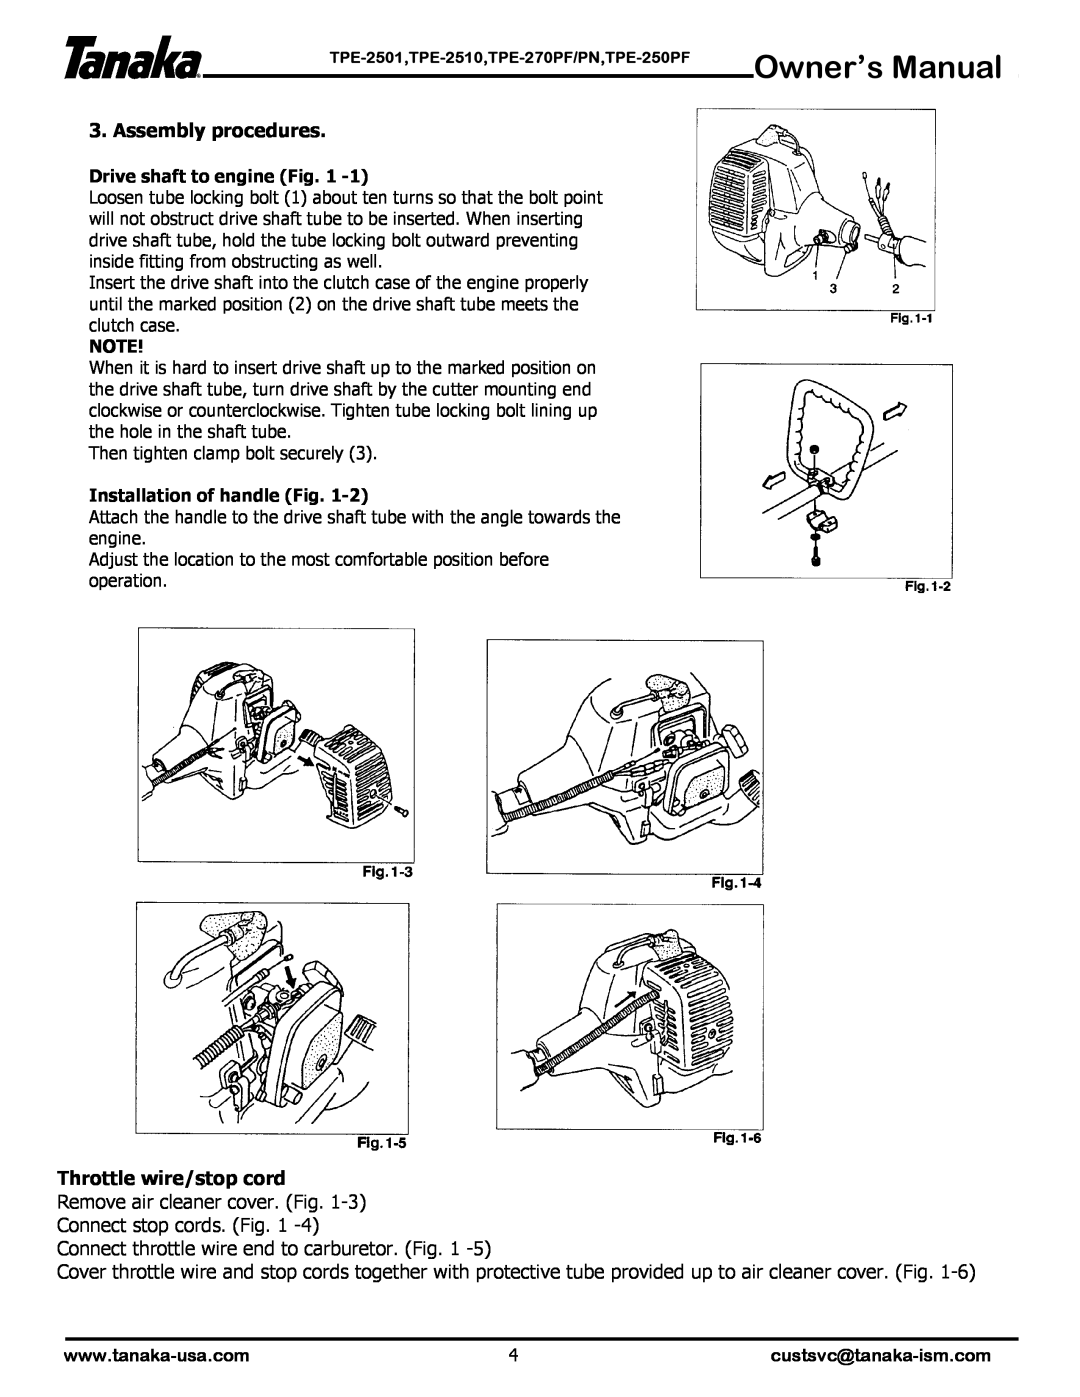 Tanaka TPE-25OPF, TPE-270PF/PN, TPE-2510, TPE-2501 manual Assembly procedures, Throttle wire/stop cord 